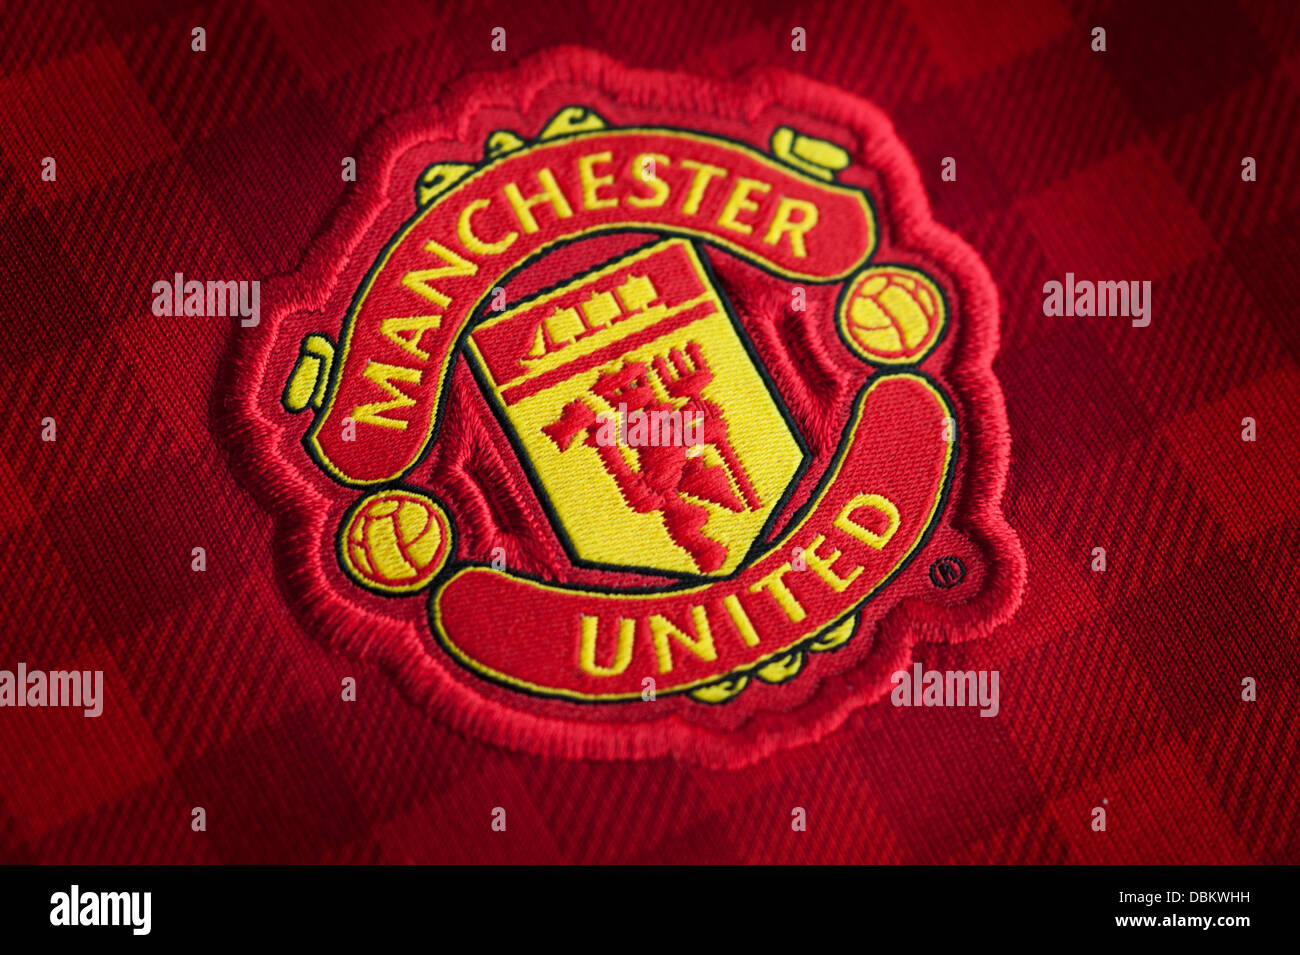 Manchester United Football Club Crest Stock Photo